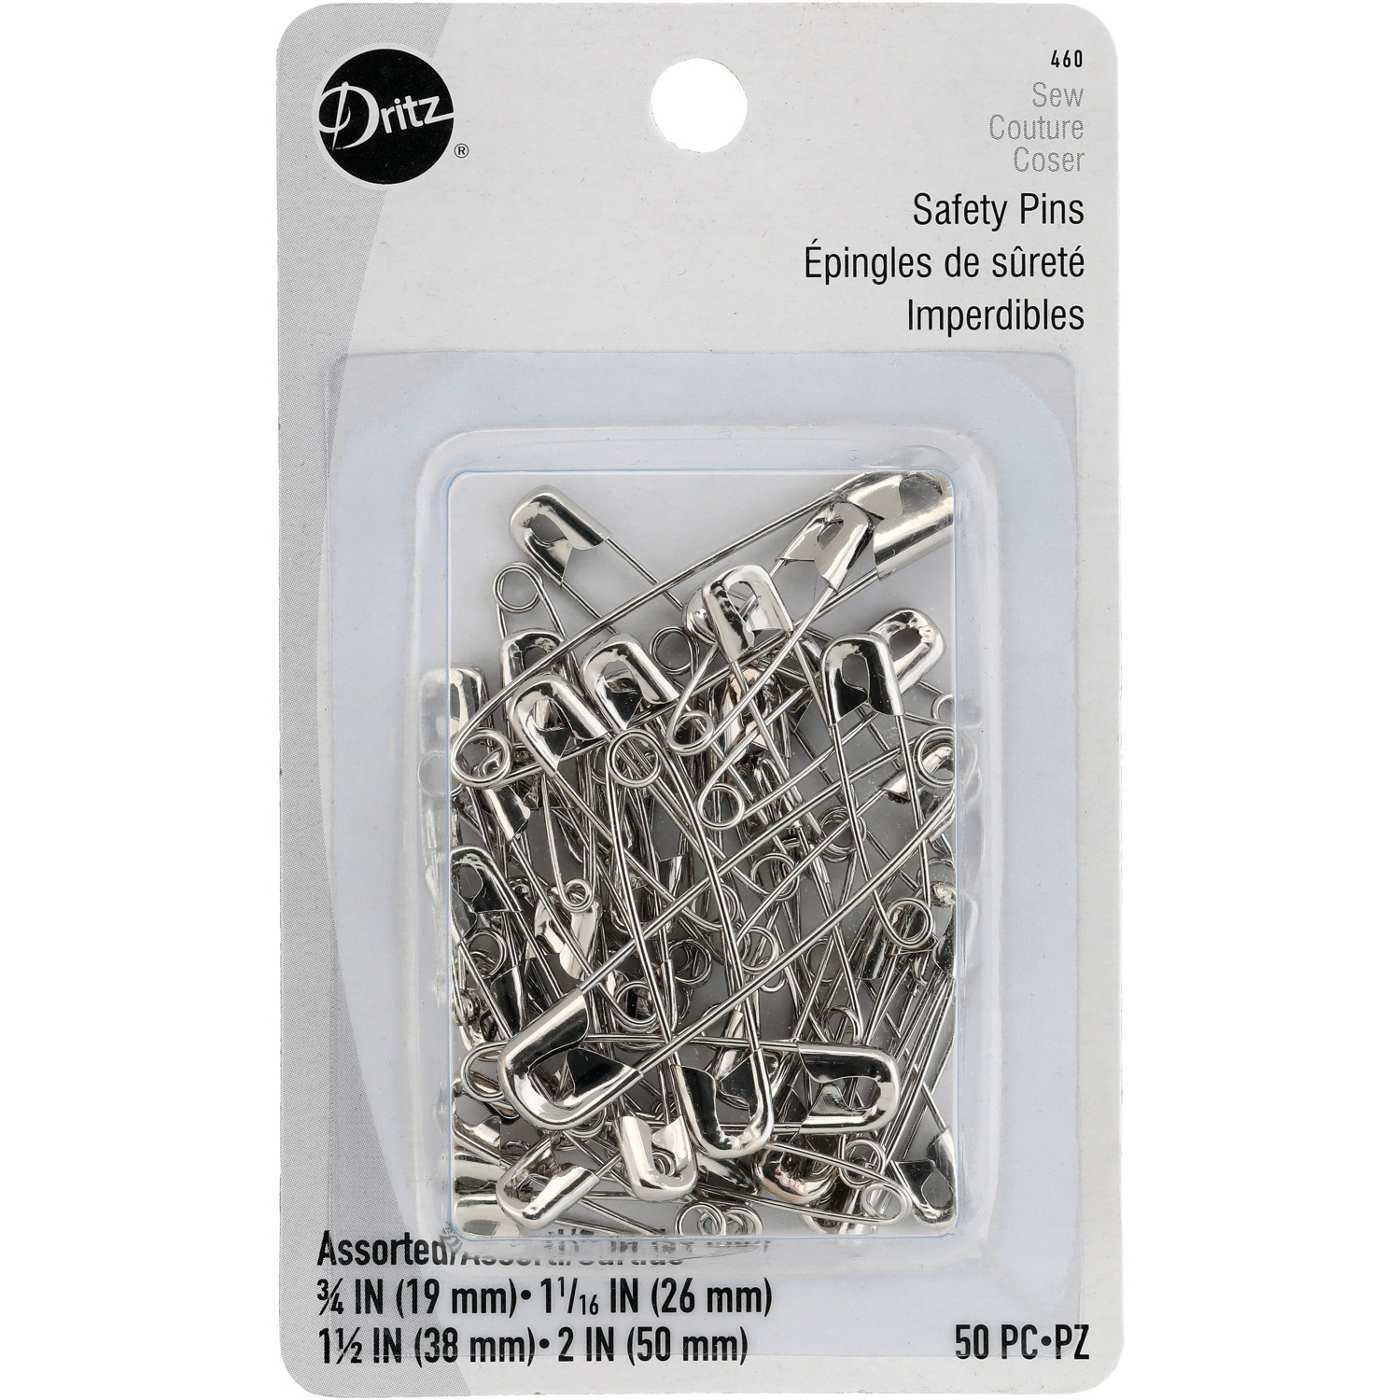 Dritz Assorted Safety Pins; image 1 of 4